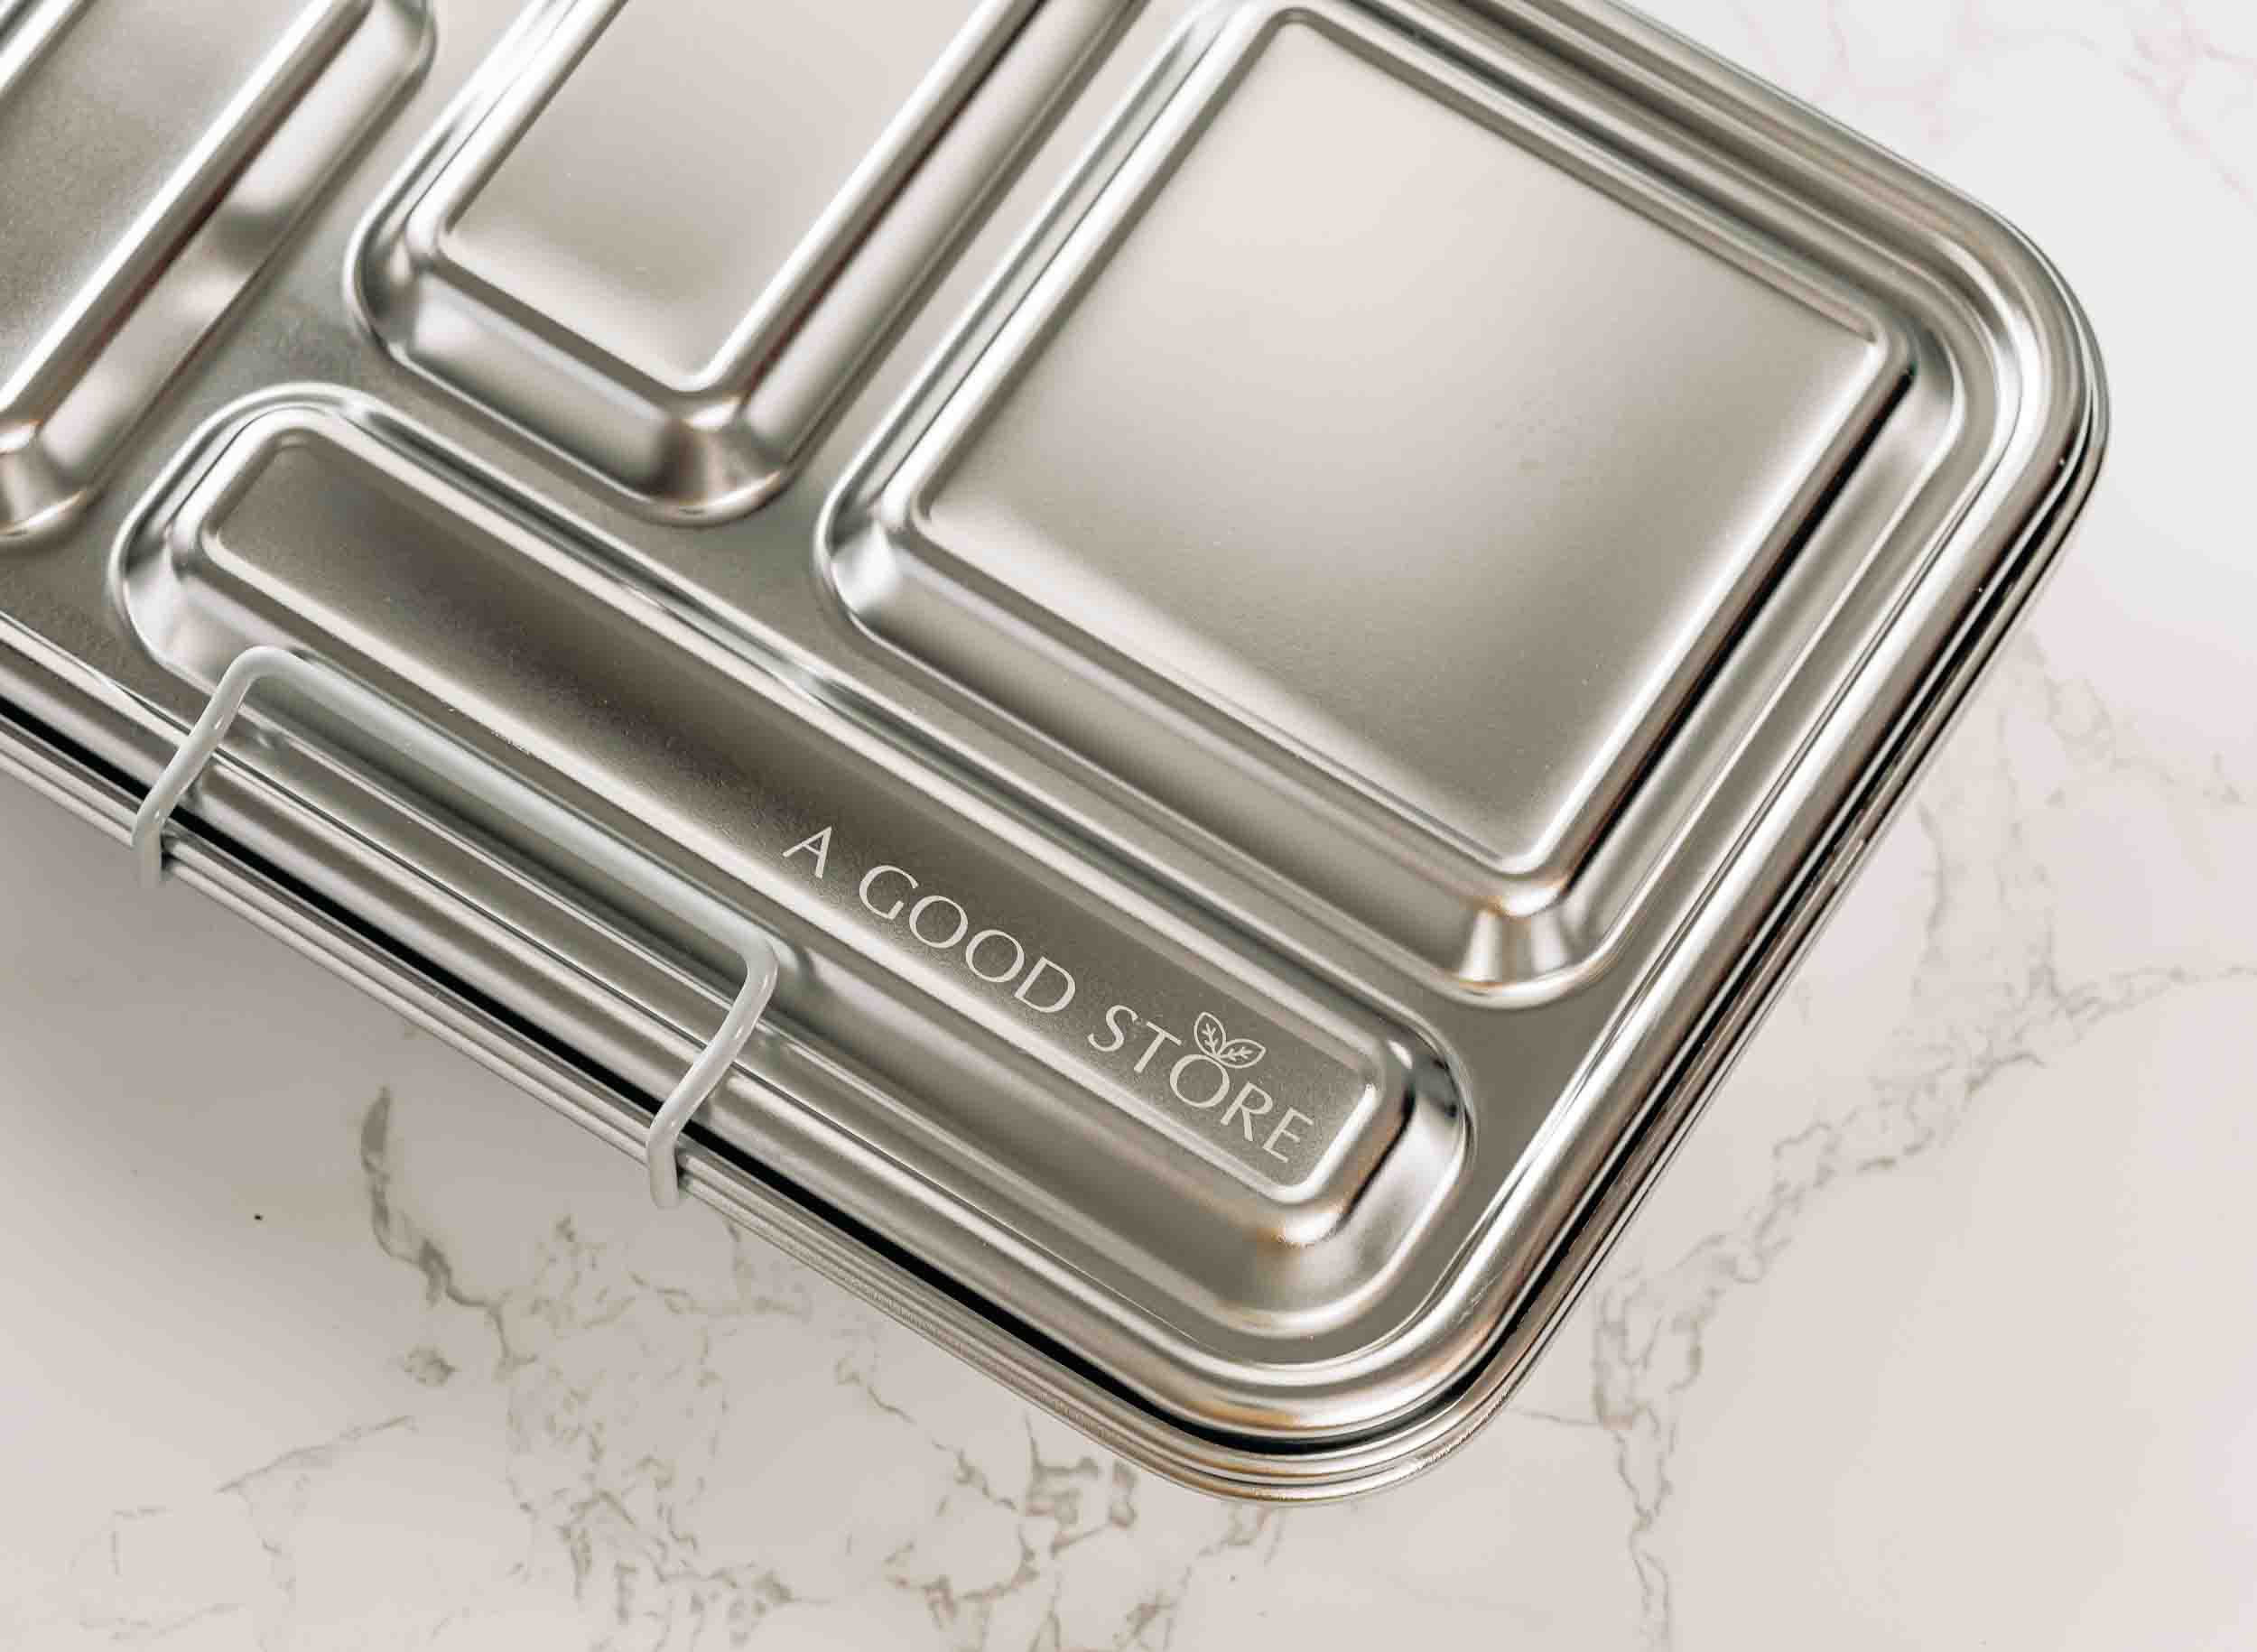 Leakproof Stainless Steel Lunchbox - 5 Compartments